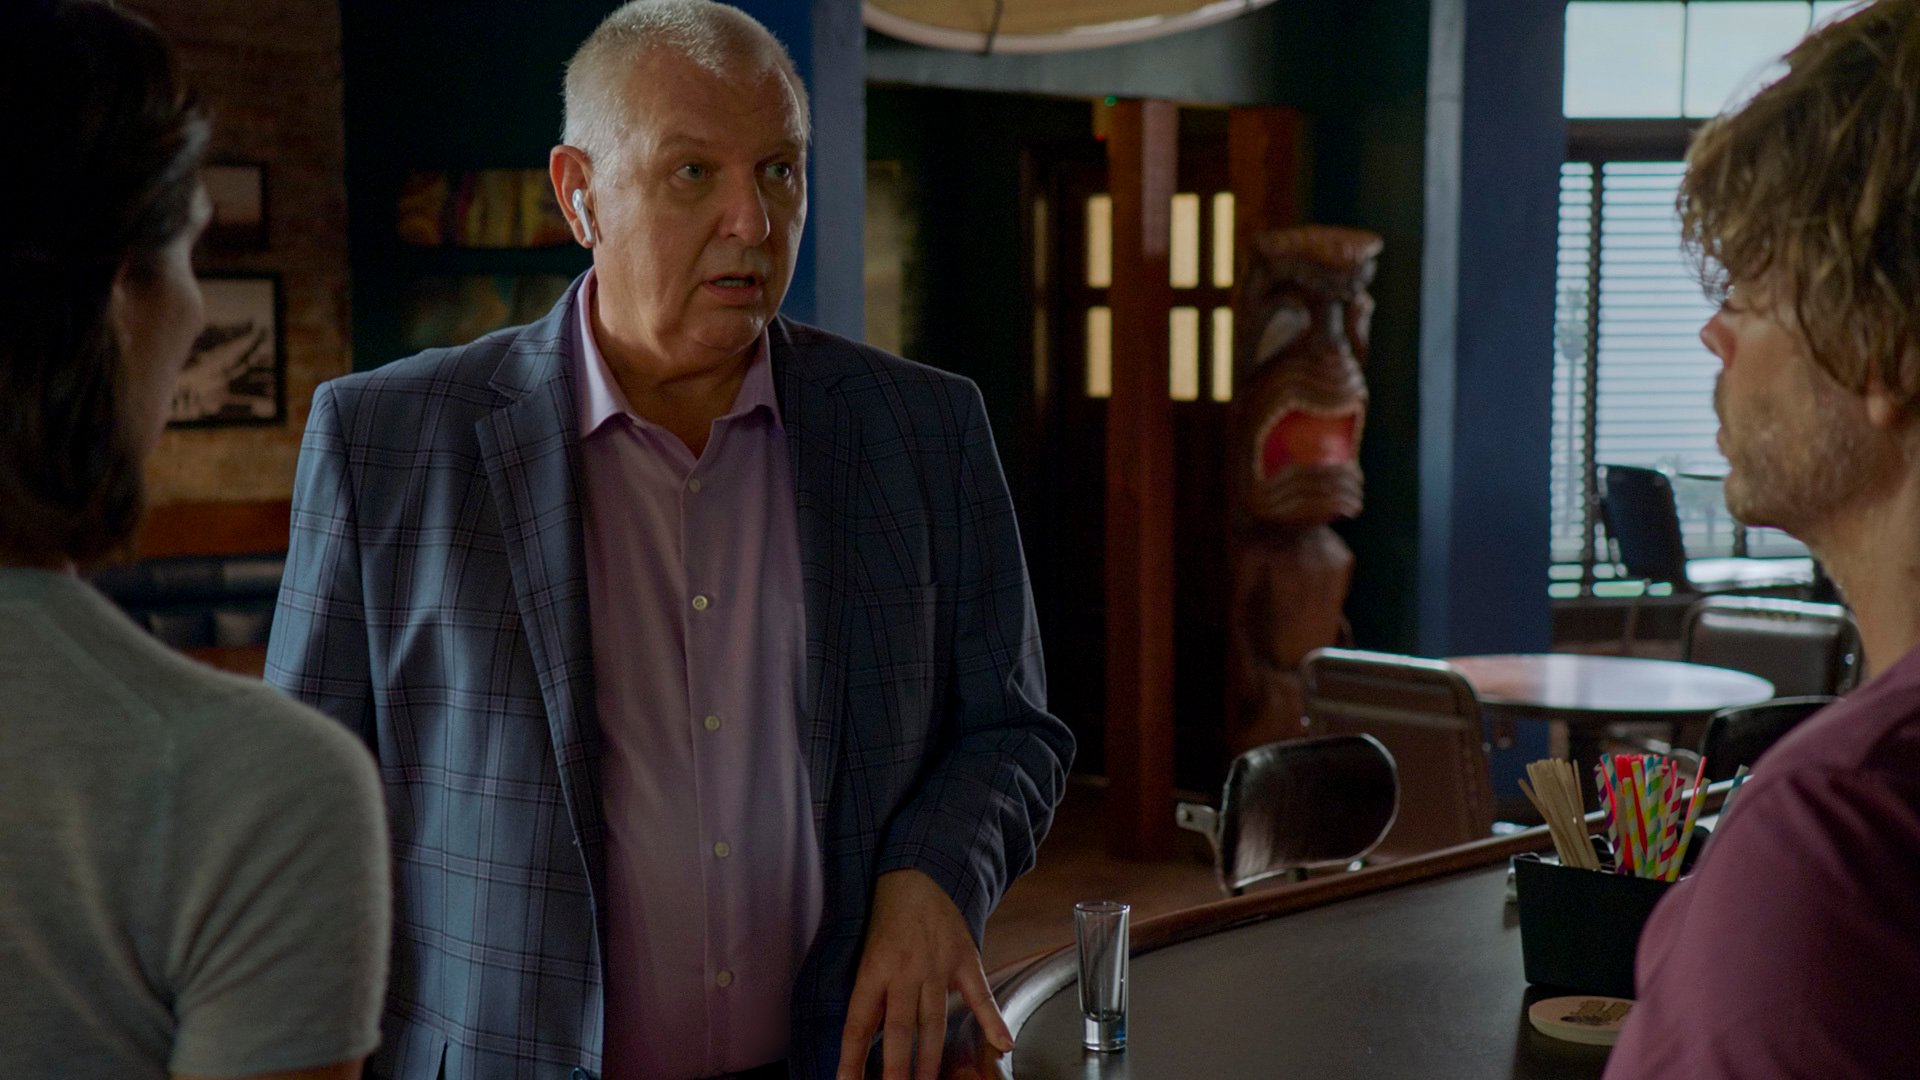 Vyto Ruginis as Arkady on NCIS Los Angeles.